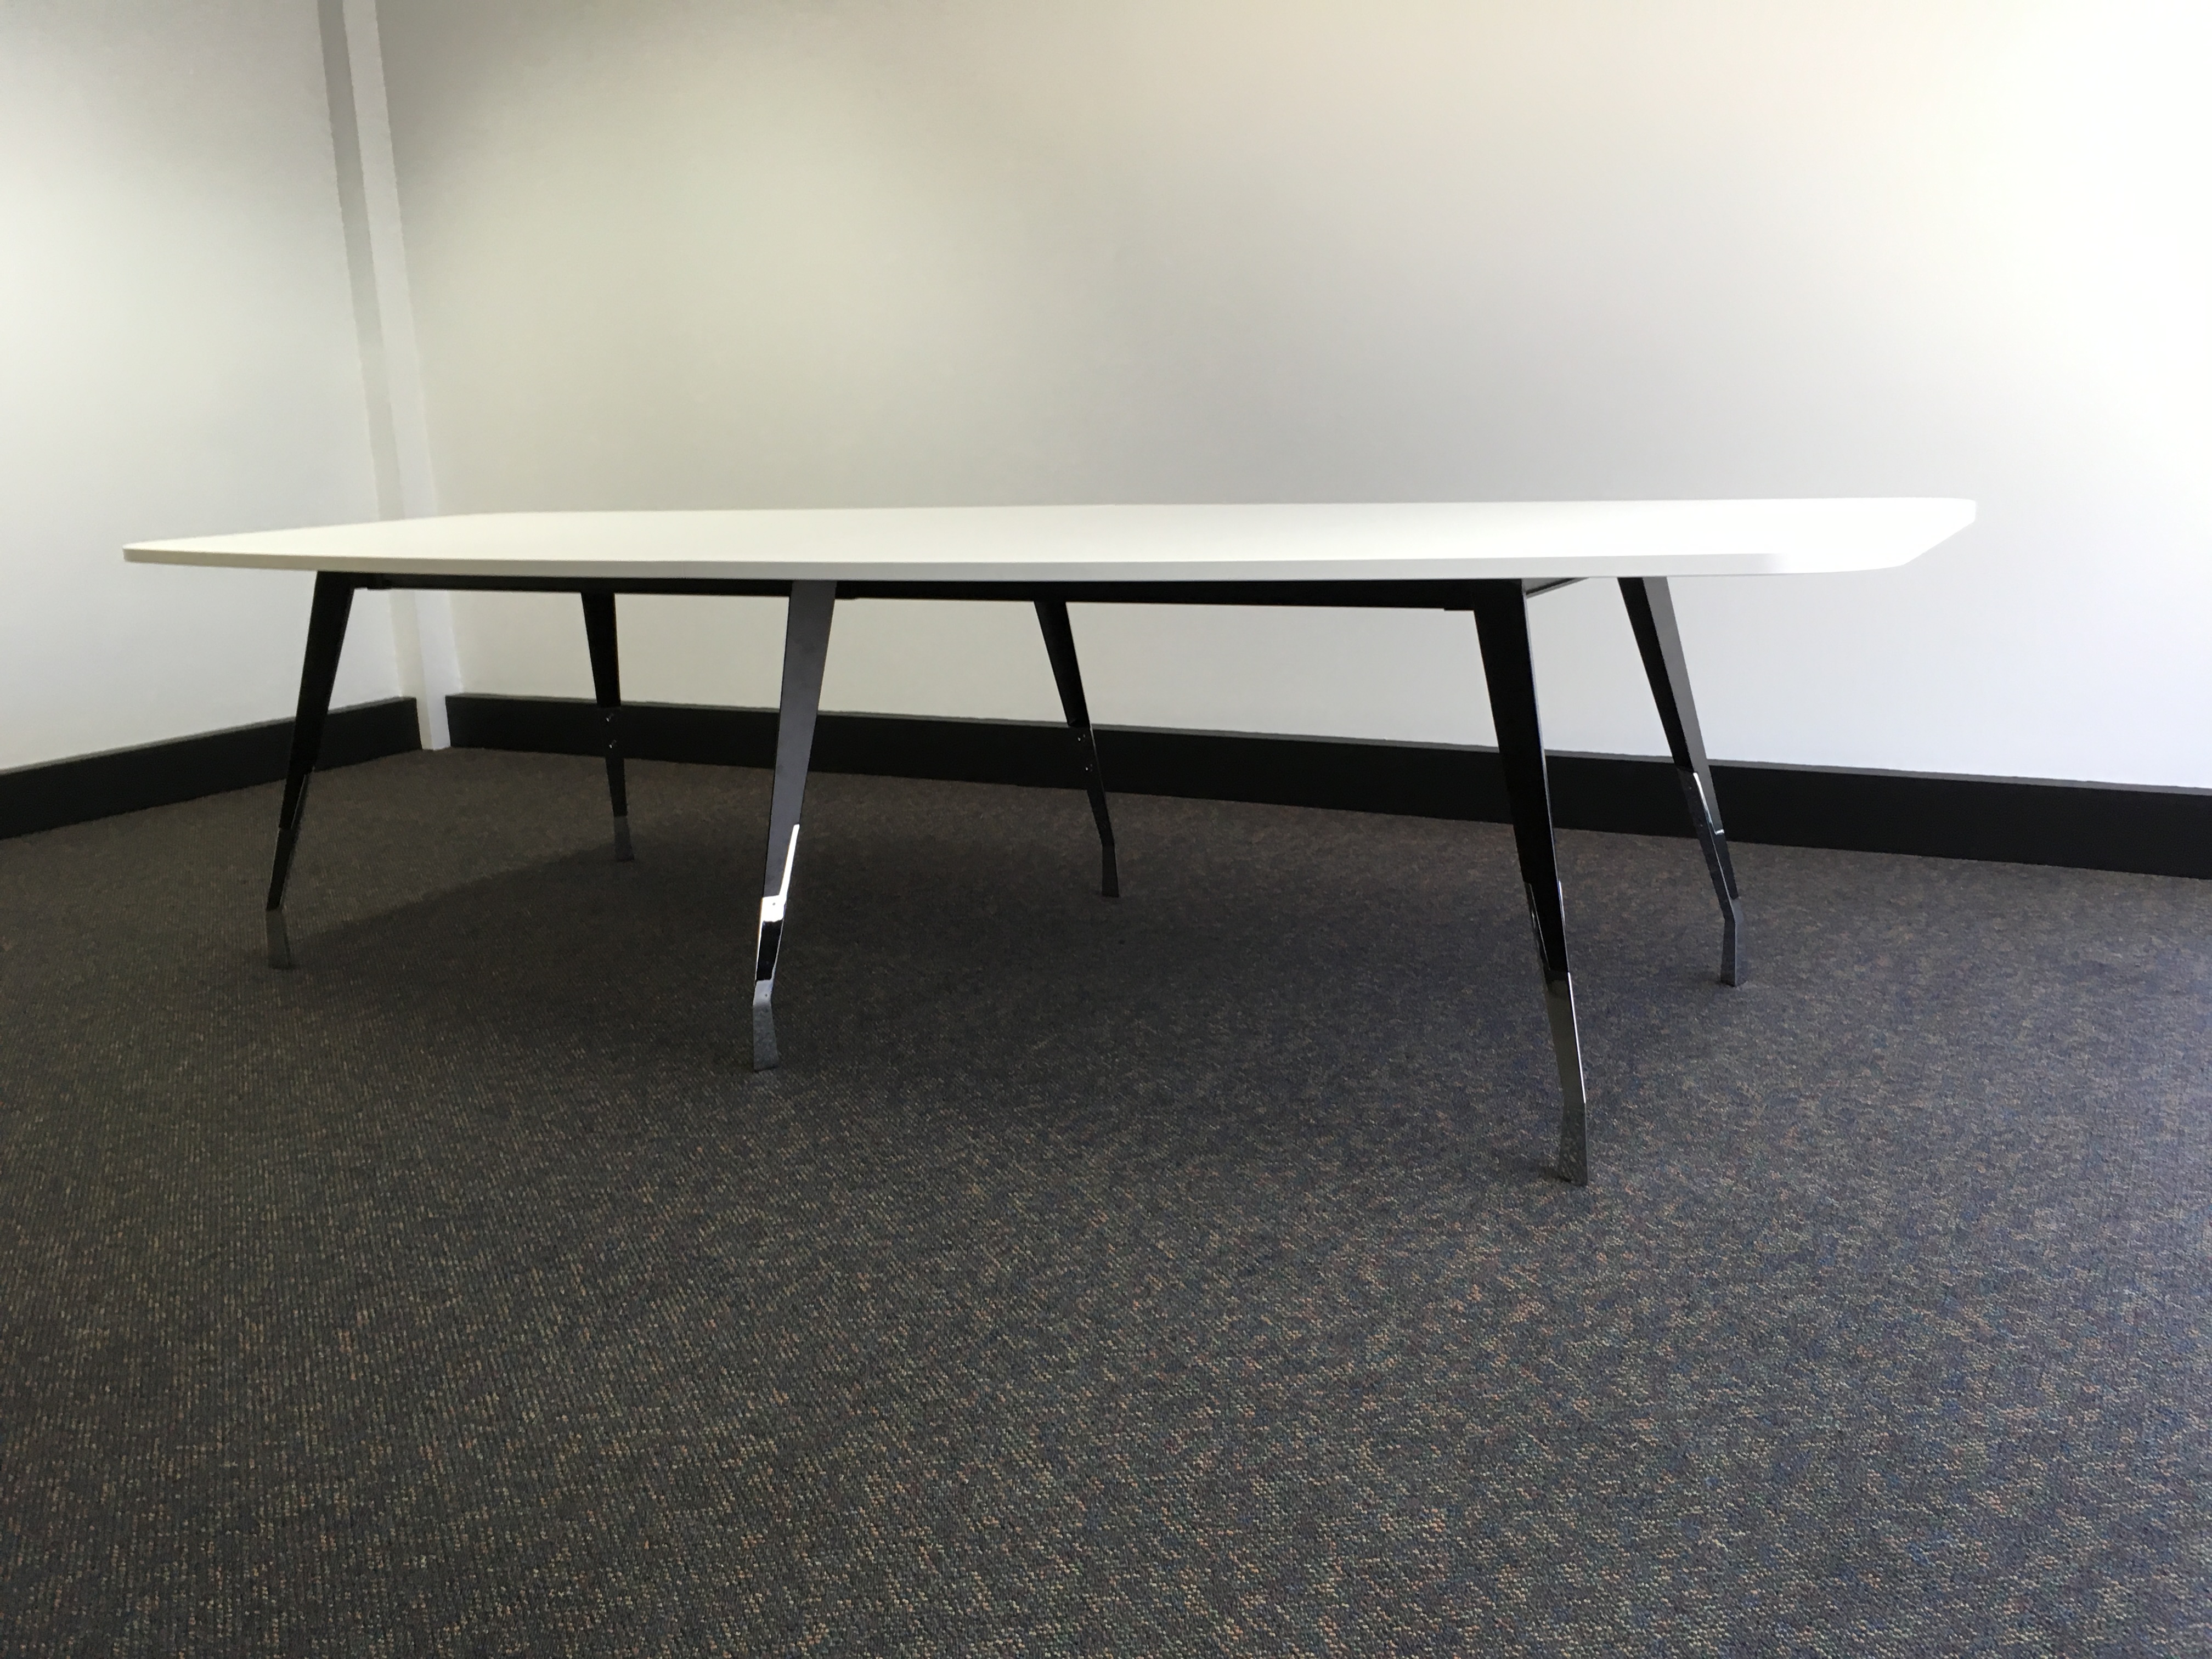 If Hawk Boardroom Table With Chrome Legs